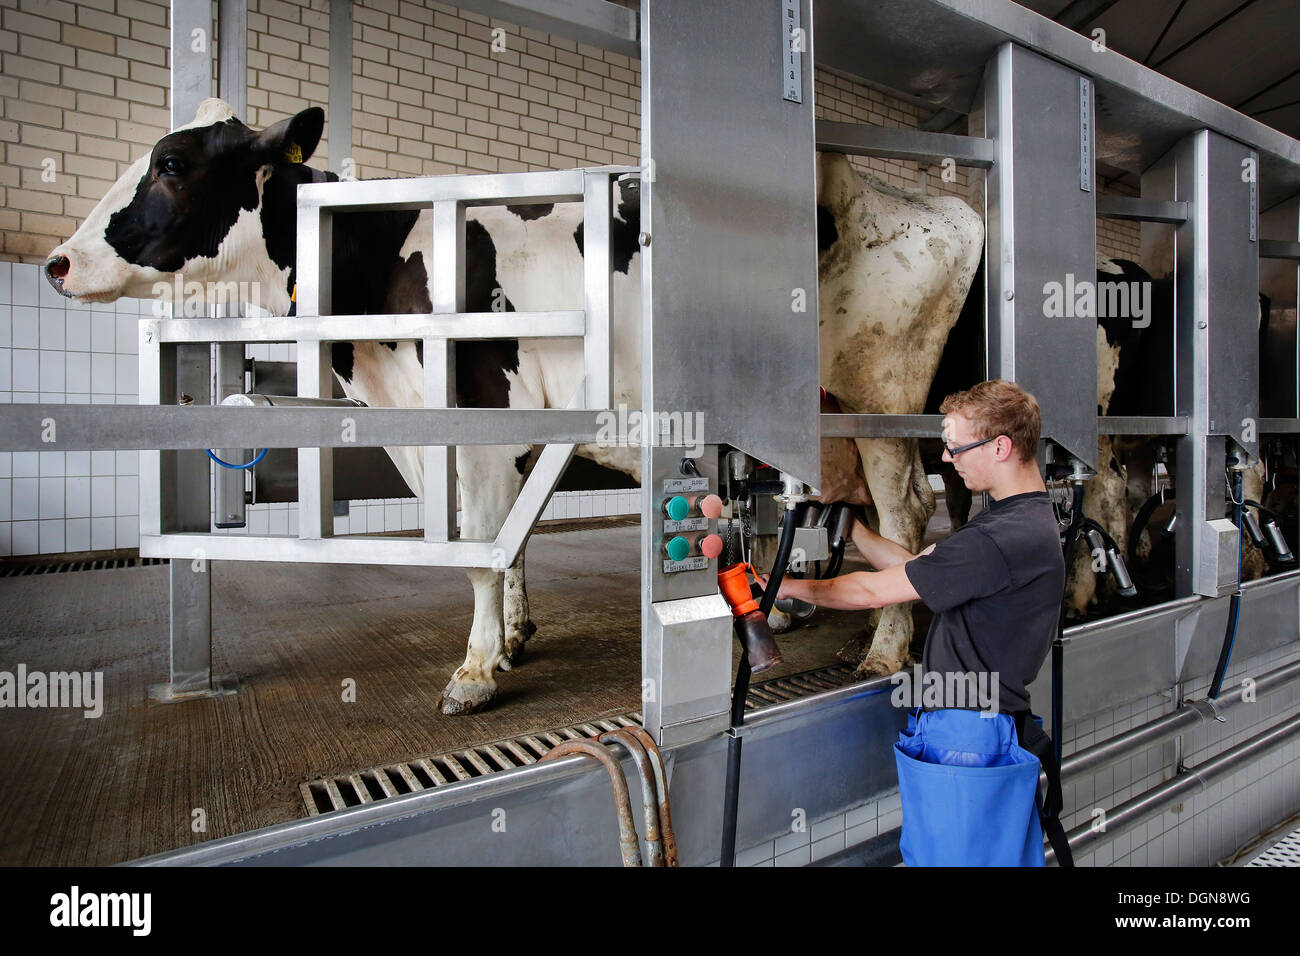 Gelsenkirchen, Germany, an apprentice at the cows in the milking parlor Stock Photo